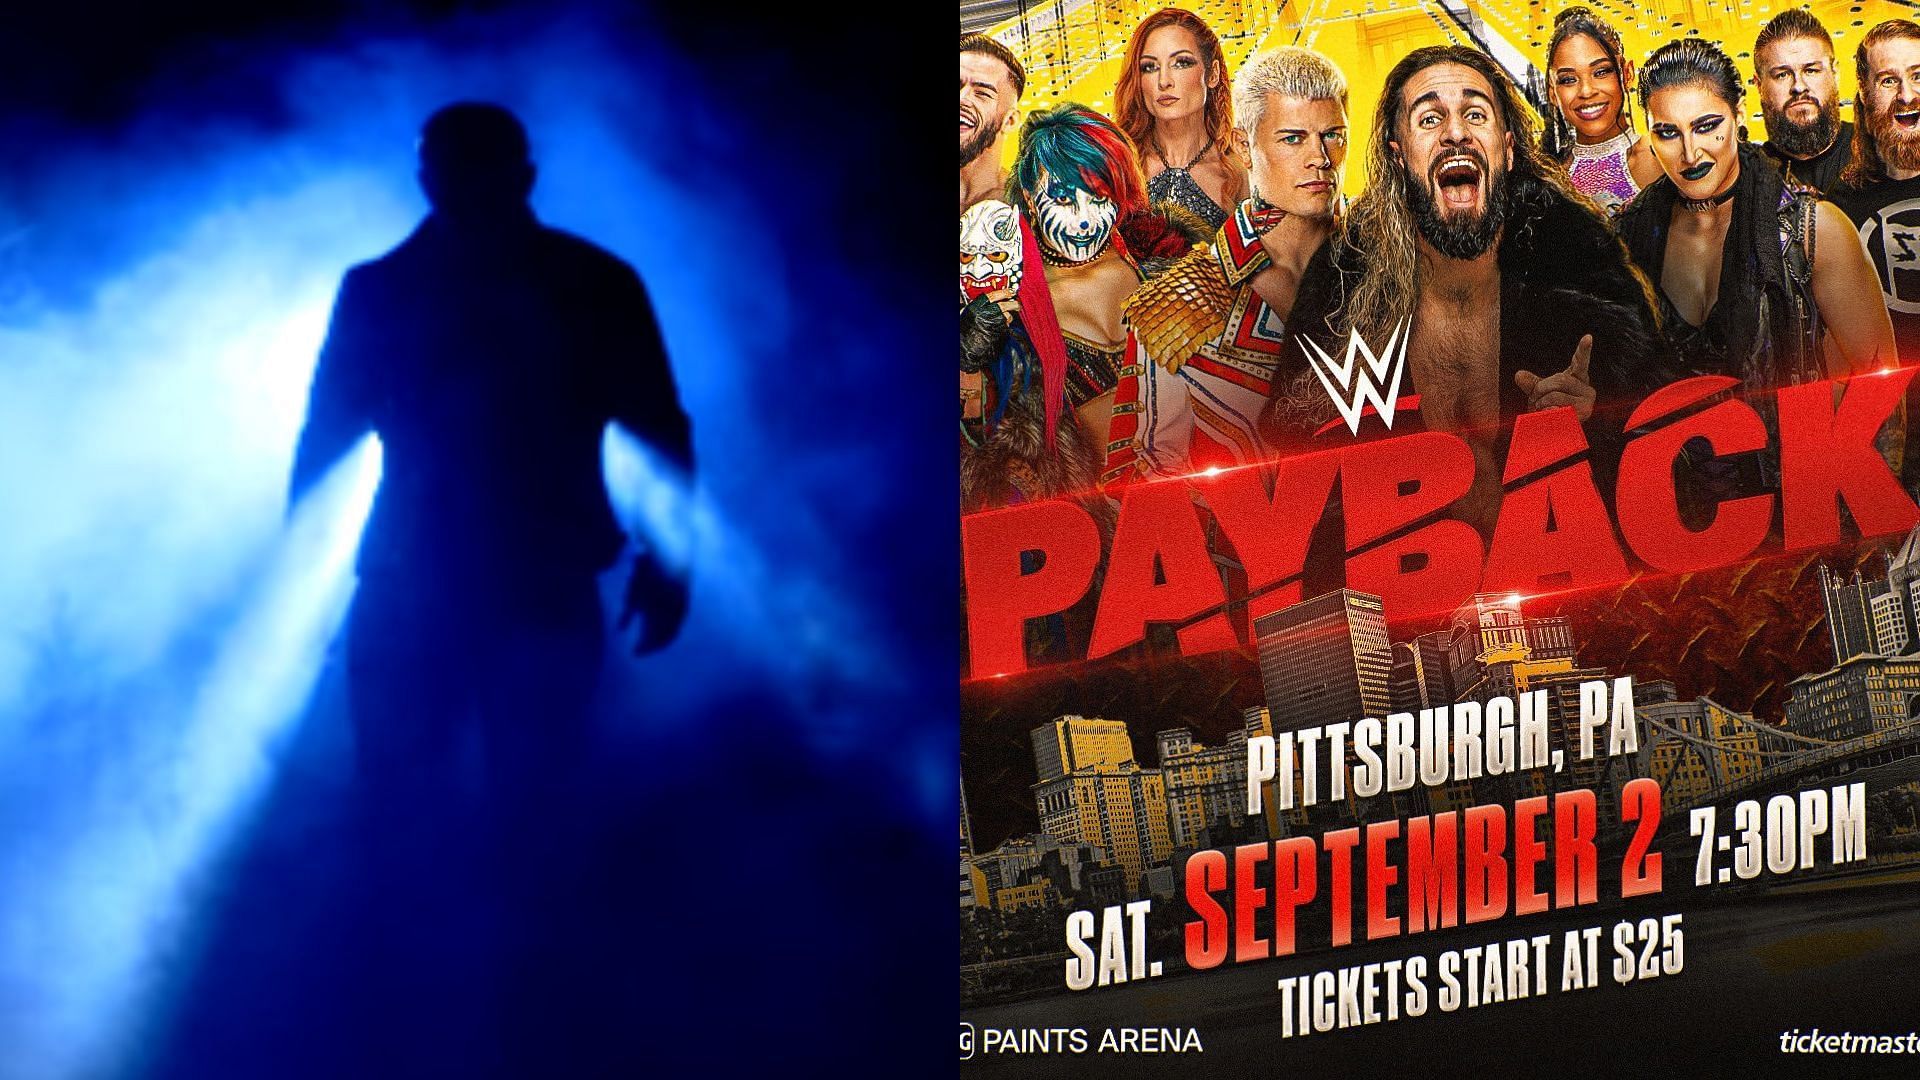 Payback will air on September 2nd in Pittsburgh.